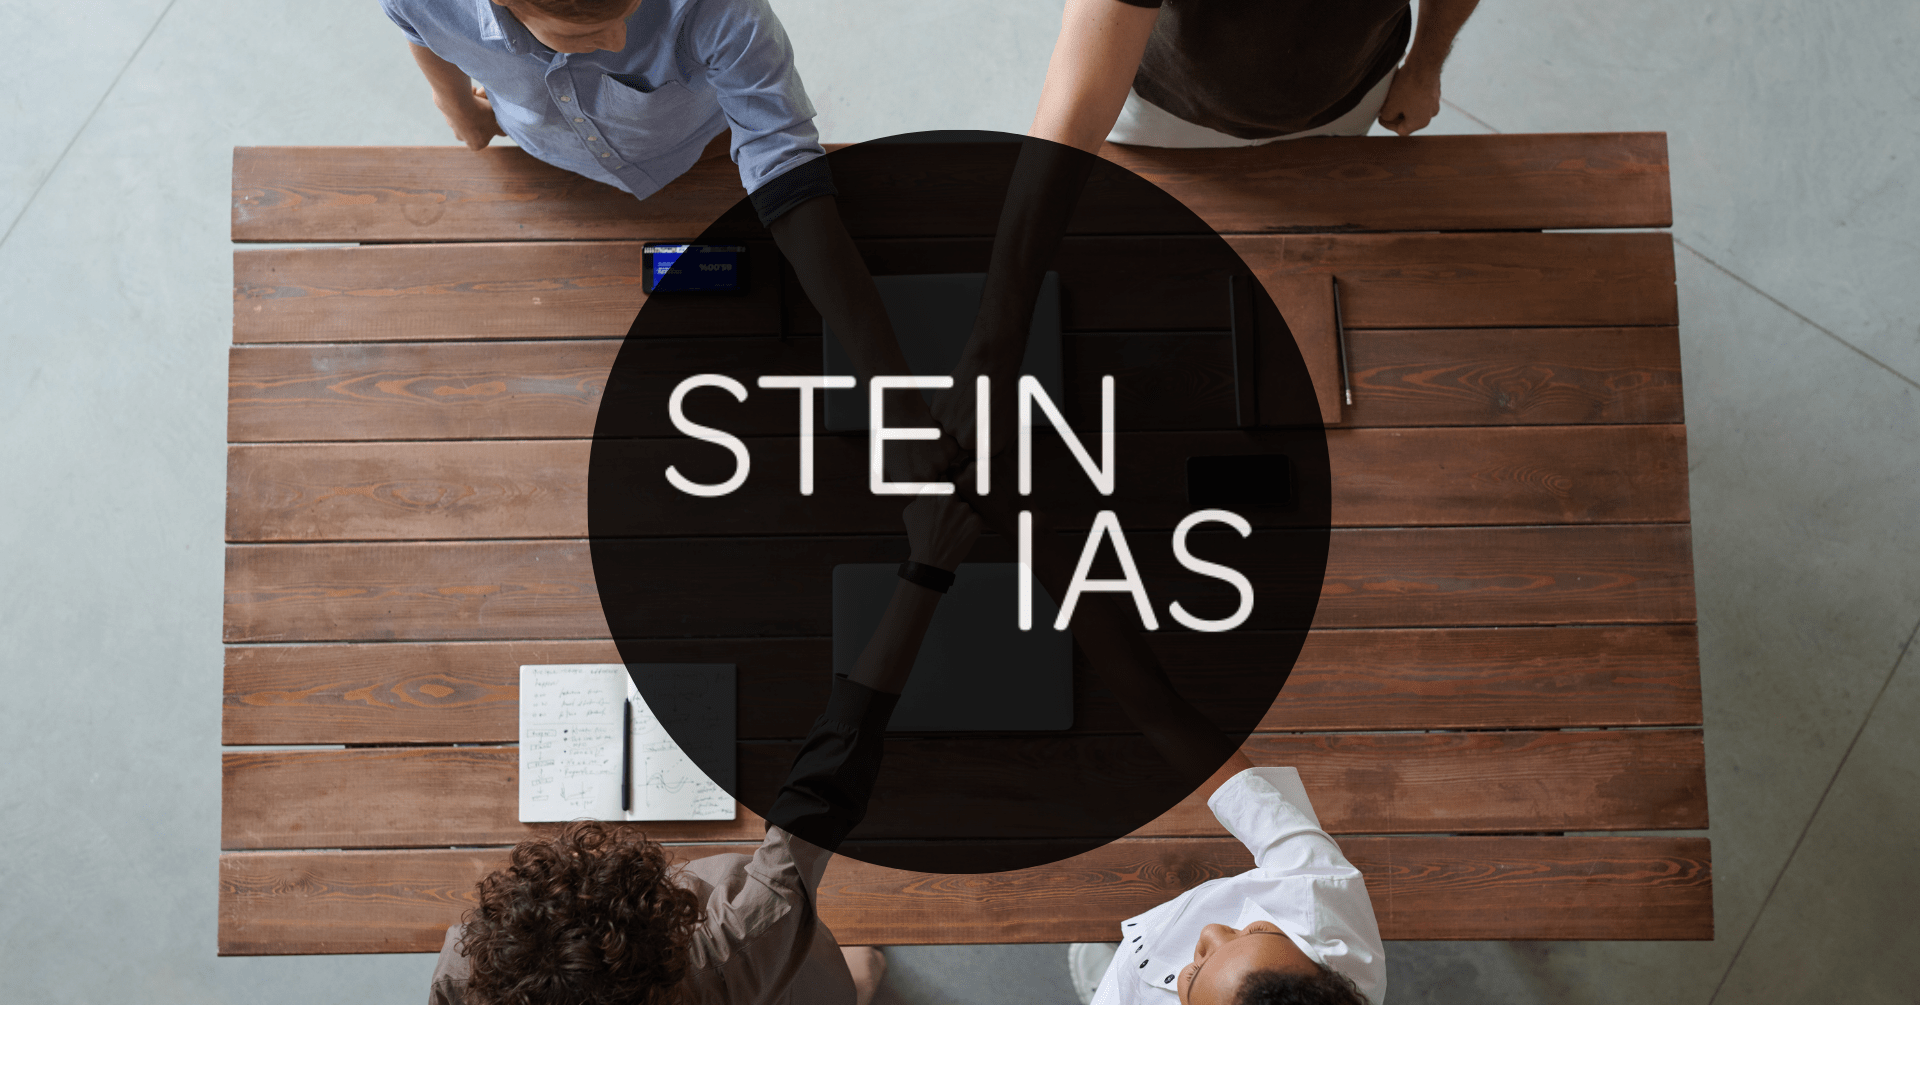 Stein IAS Growth Enablement